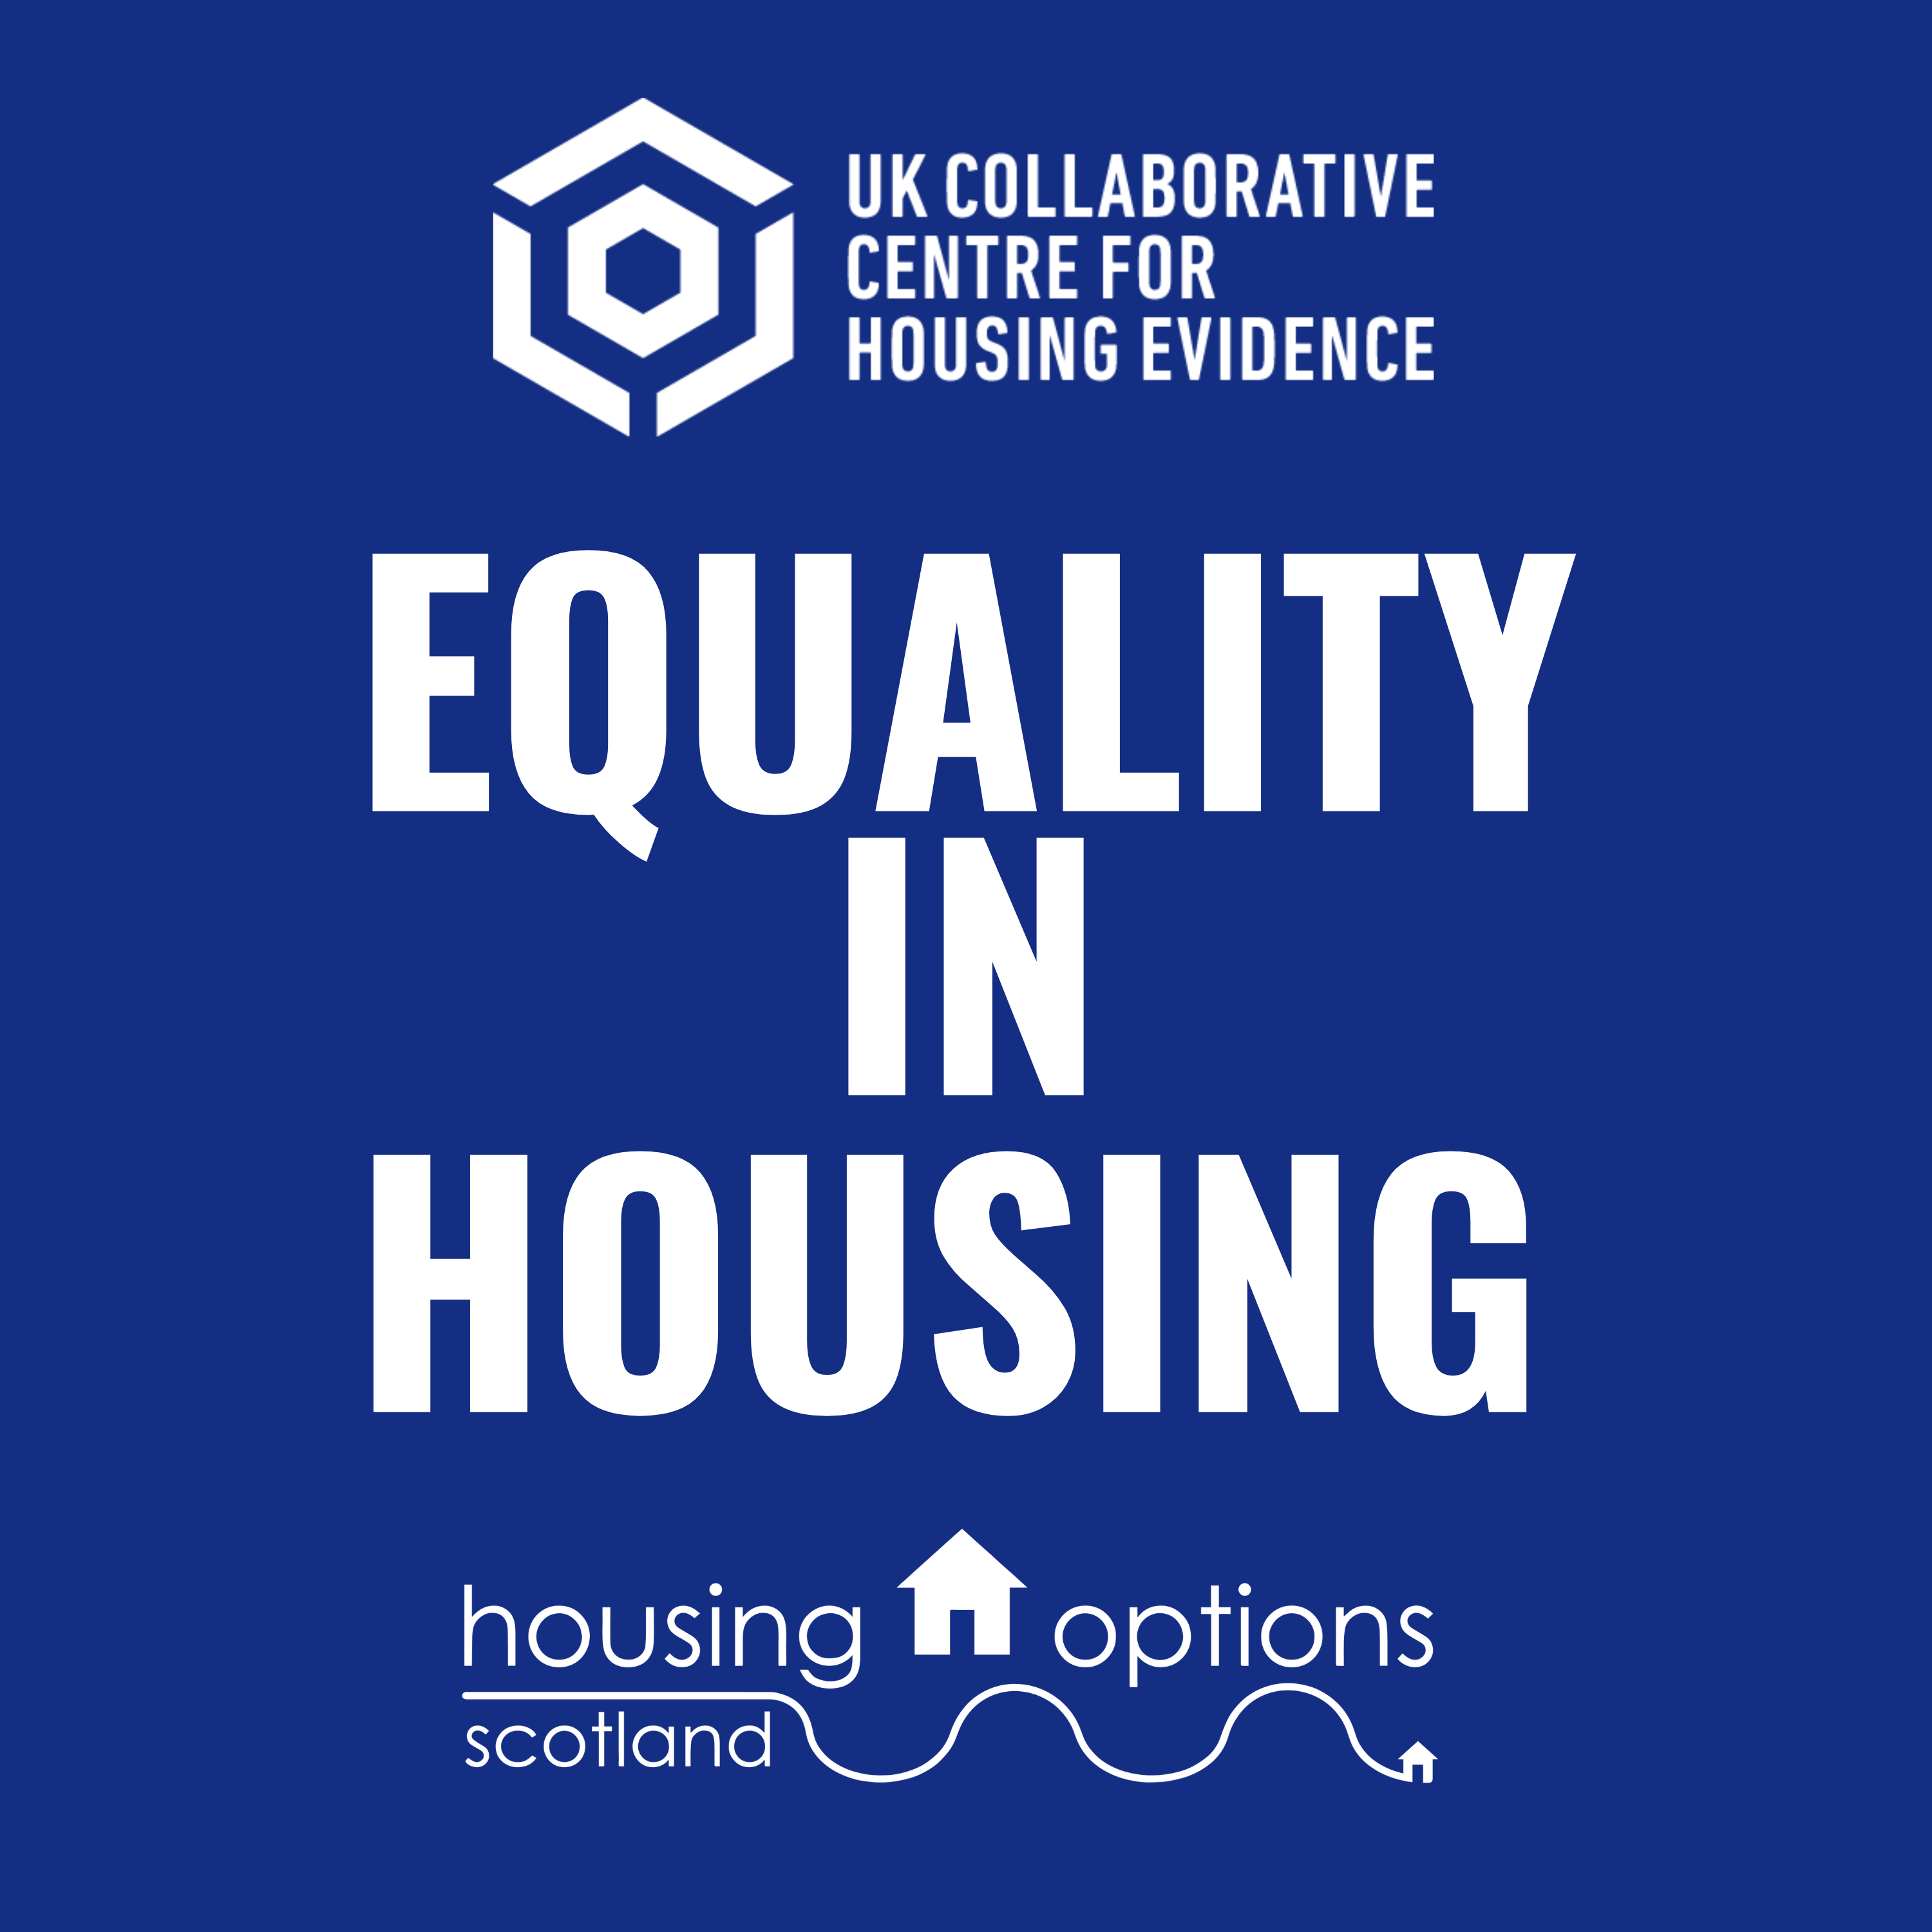 Equality in Housing podcast launched